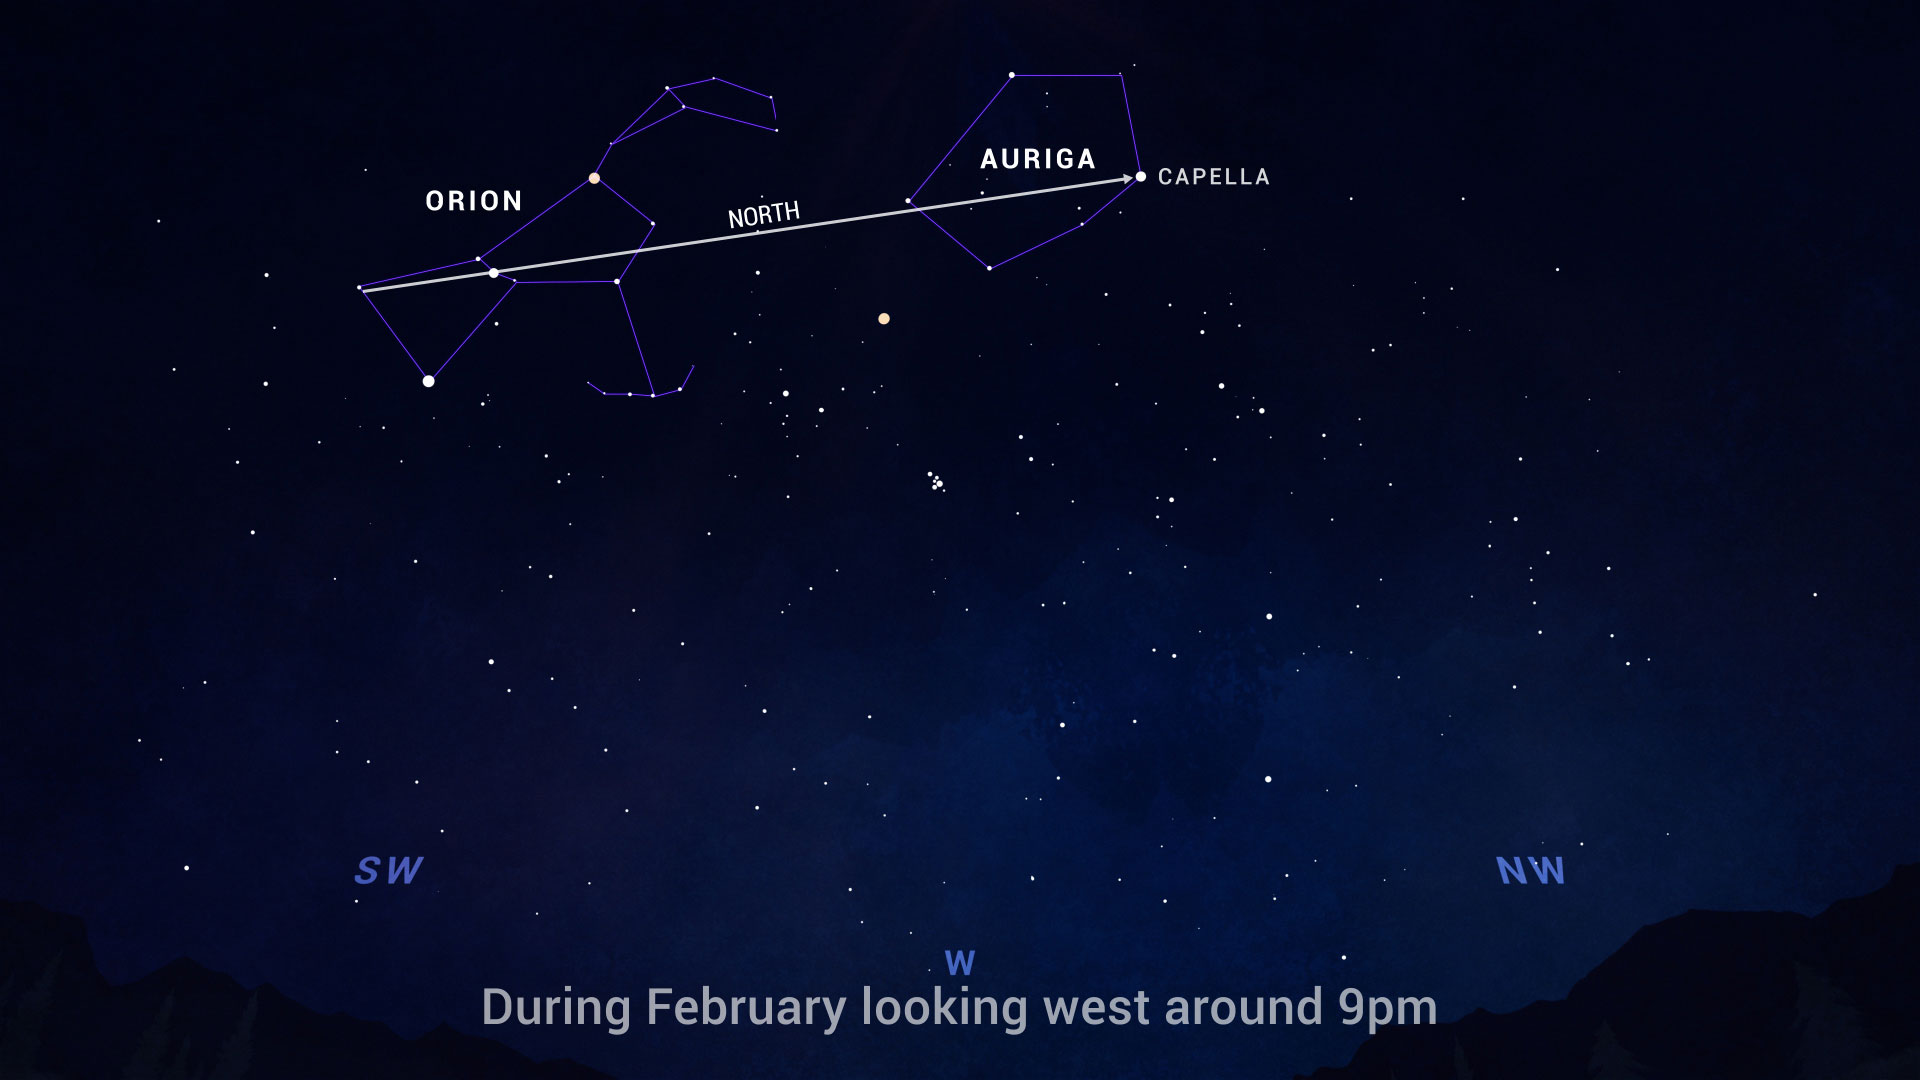 An illustrated sky chart shows constellations Orion and Auriga in the night sky, with a long arrow pointing north from Orion to Auriga's brightest star, Capella.